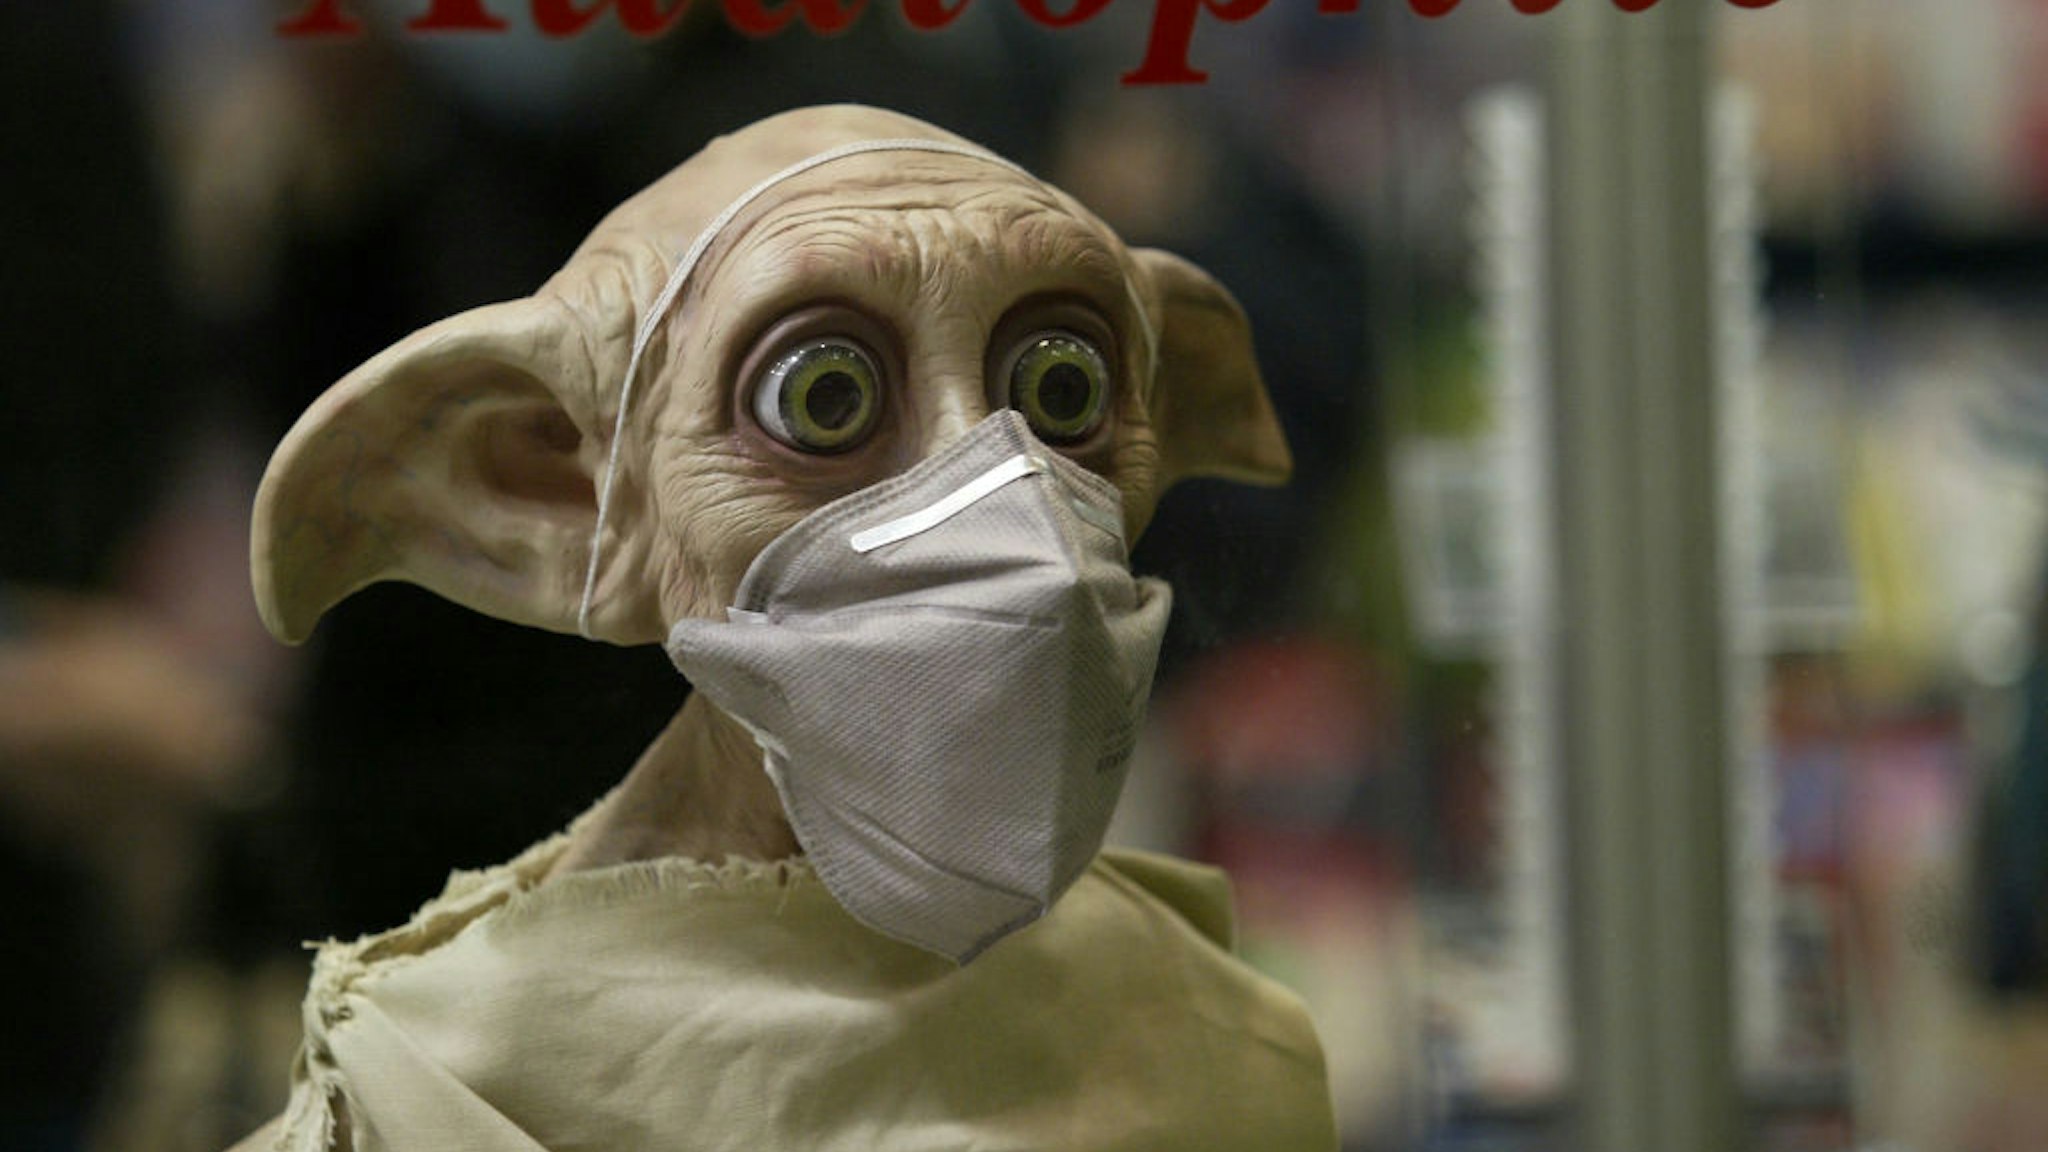 Dobby, character of film "Harry Potter" on display at HK records company, also wears a facemask, Pacific Place, Admiralty. 11 April 2003 (Photo by Dickson Lee/South China Morning Post via Getty Images)